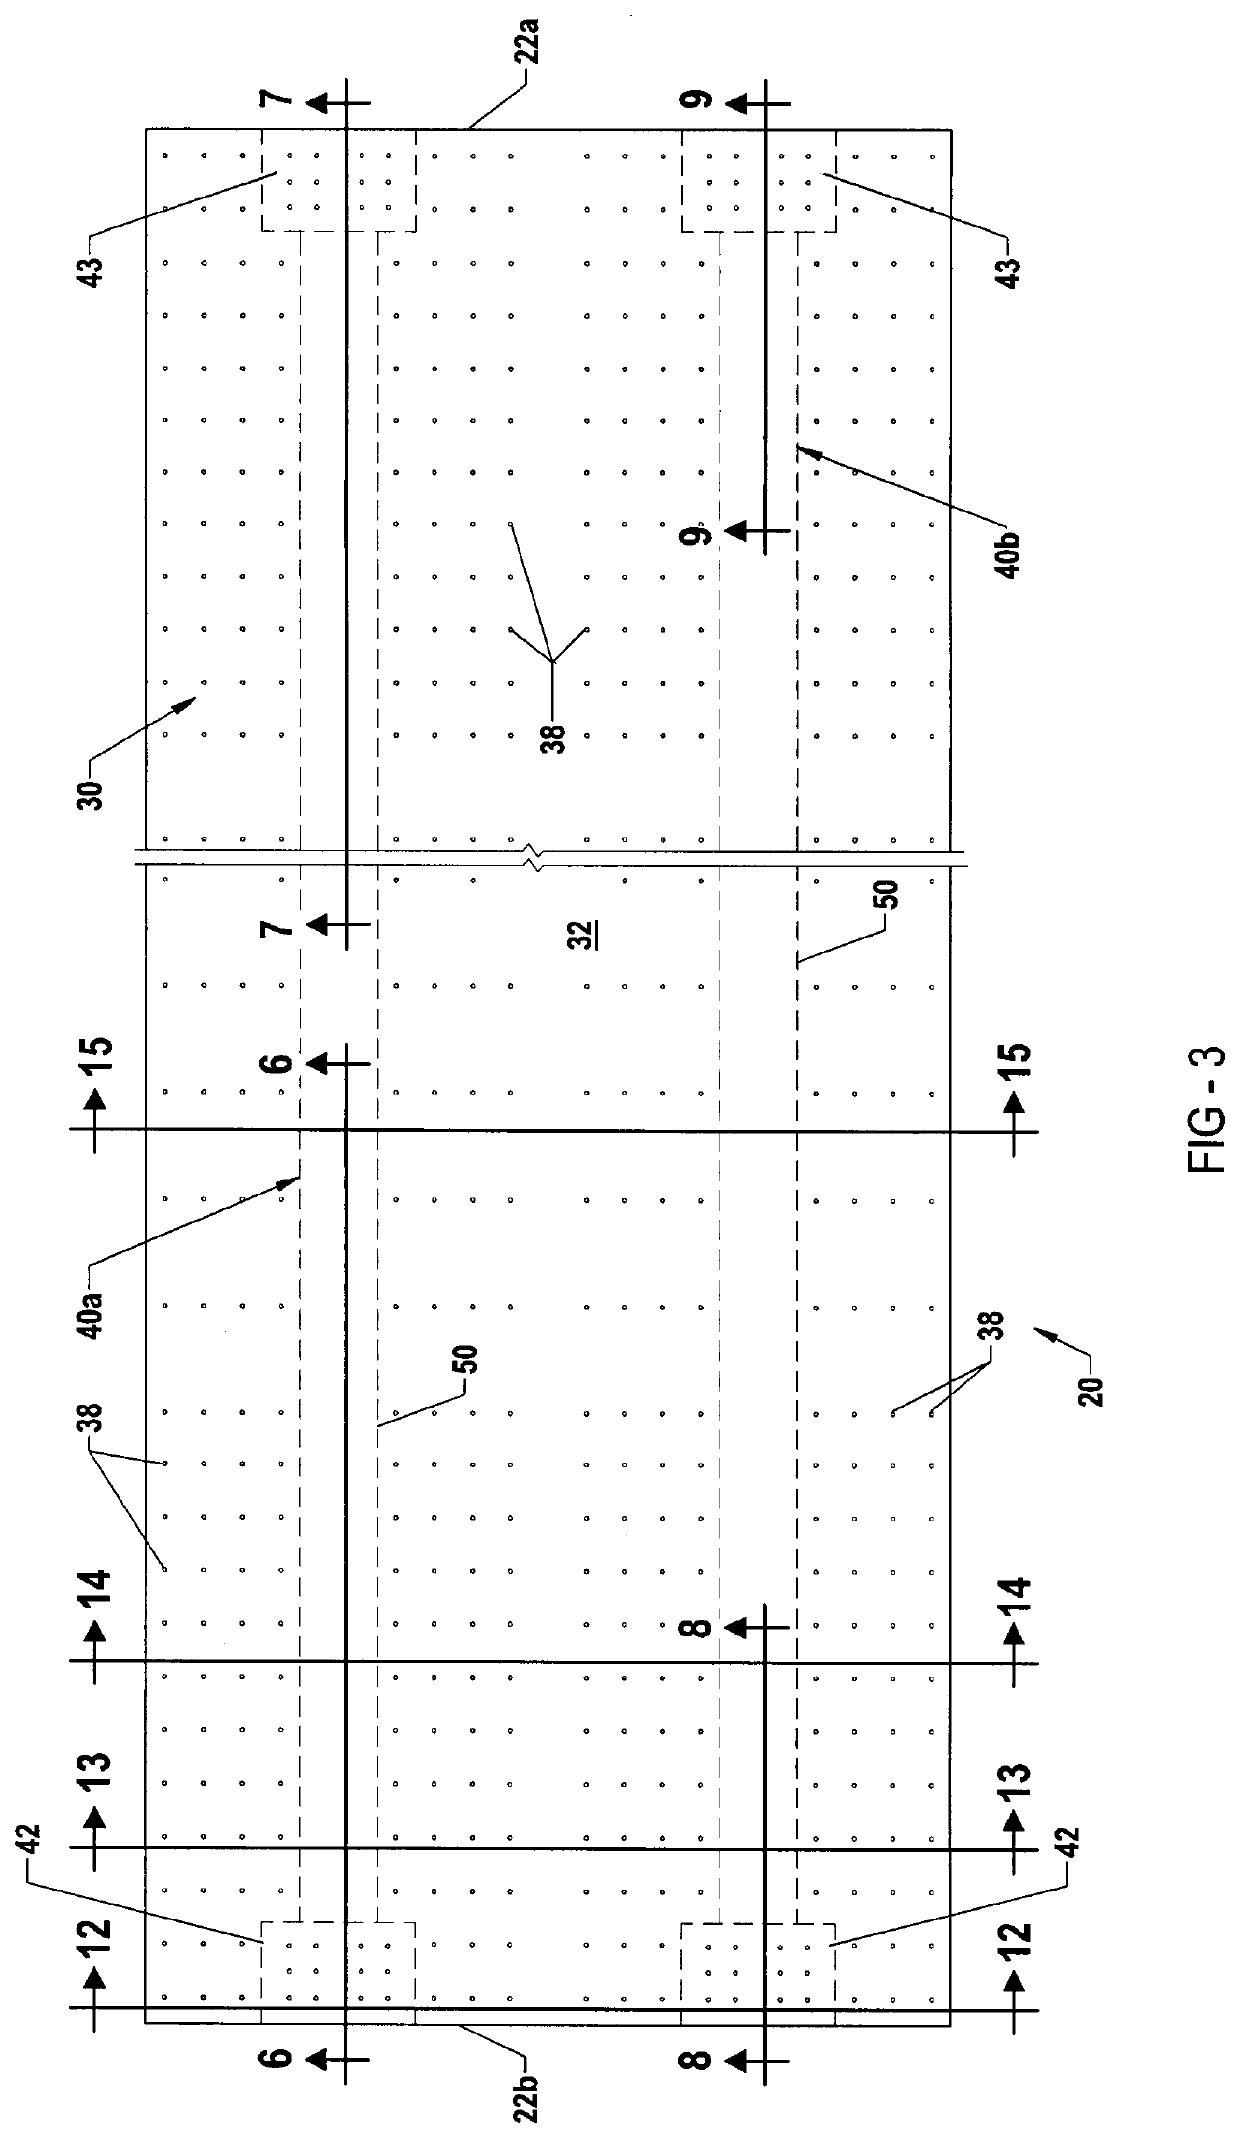 Cellulose-based structural flooring panel assembly